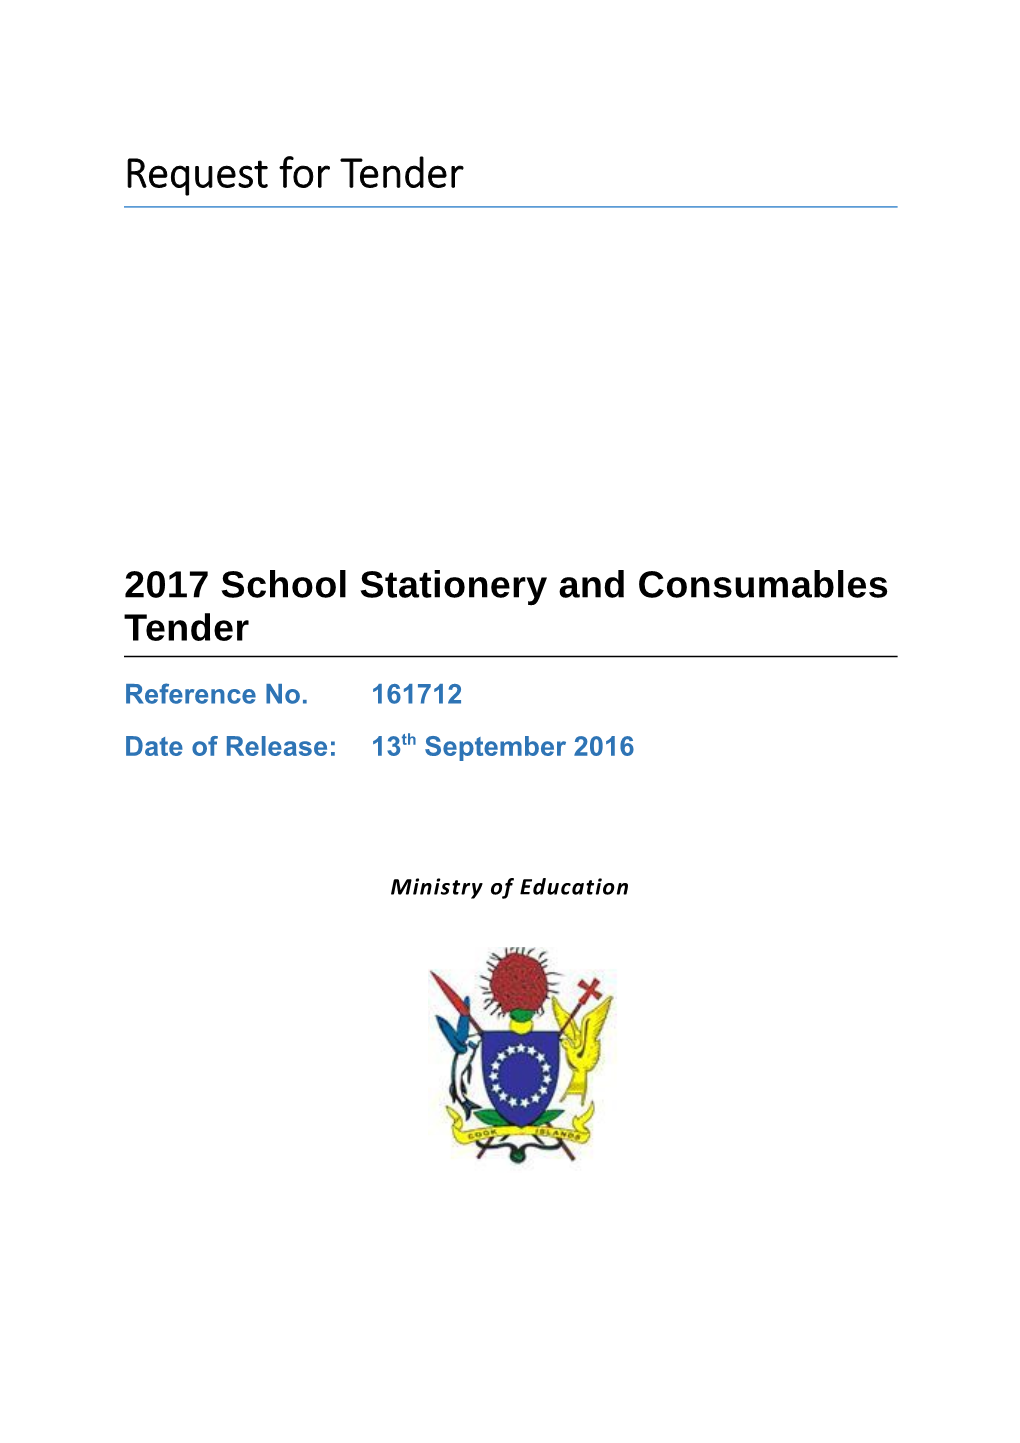 2017 School Stationery and Consumables Tender